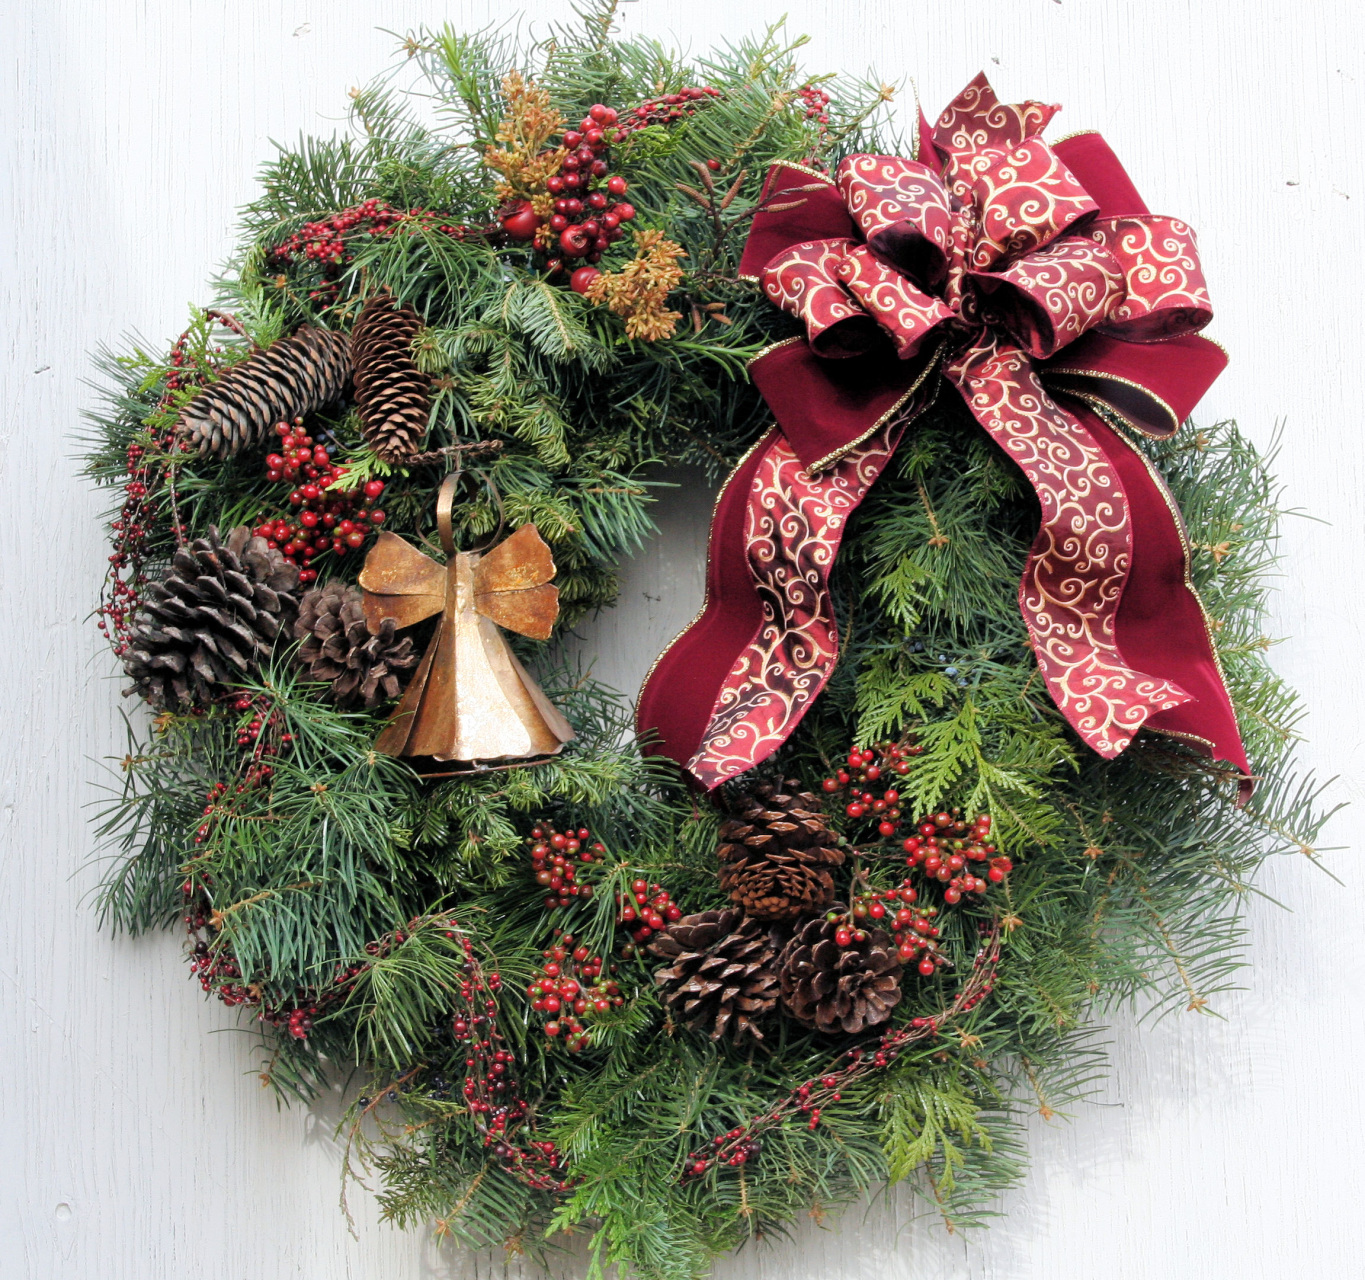 Handmade Christmas Evergreen Wreath With Red Ornaments, And A Big